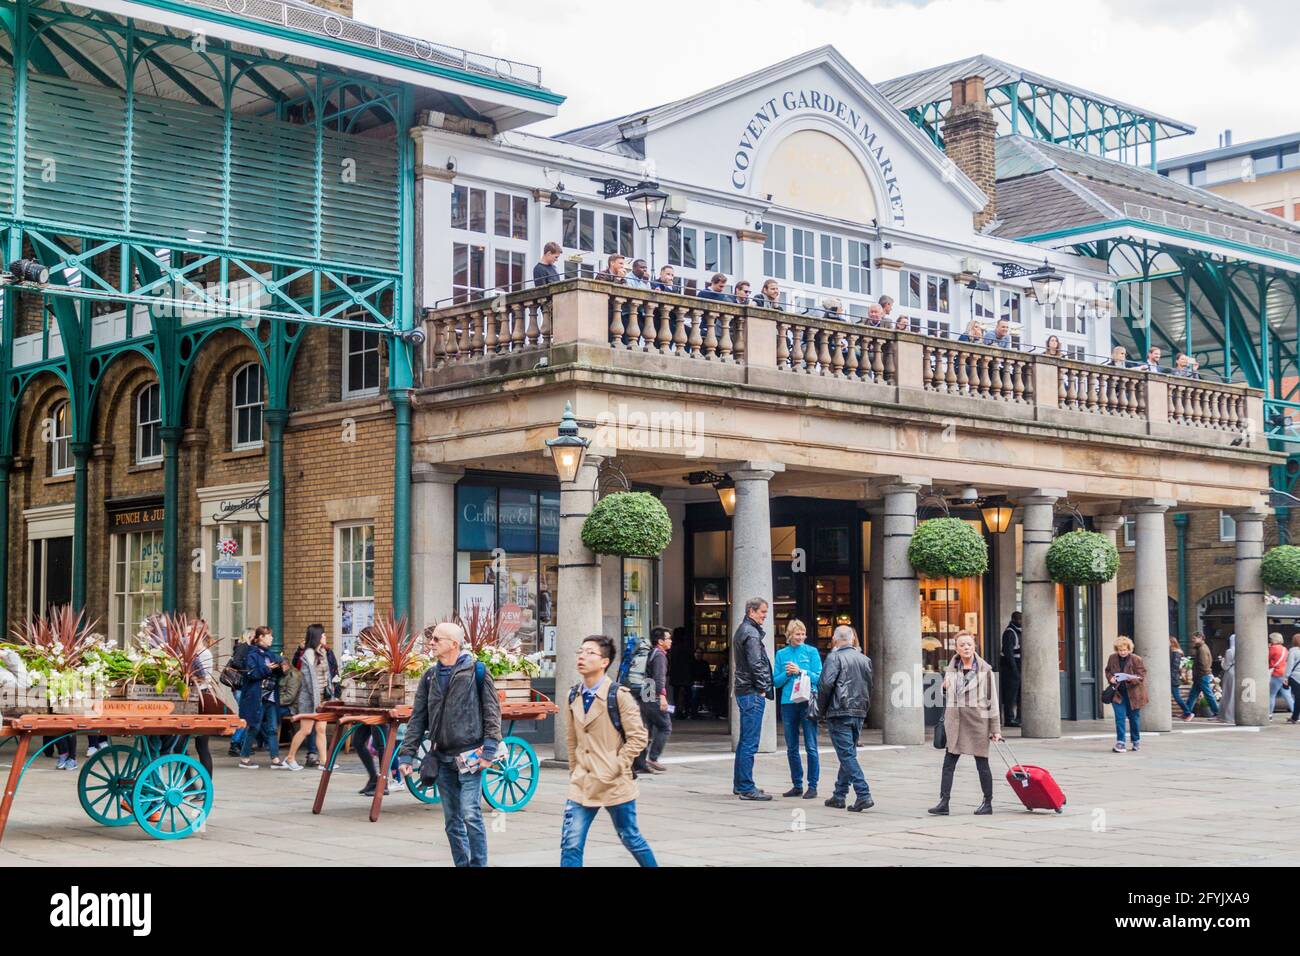 LONDON, UNITED KINGDOM - OCTOBER 4, 2017: View of Covent Garden market in London. Stock Photo